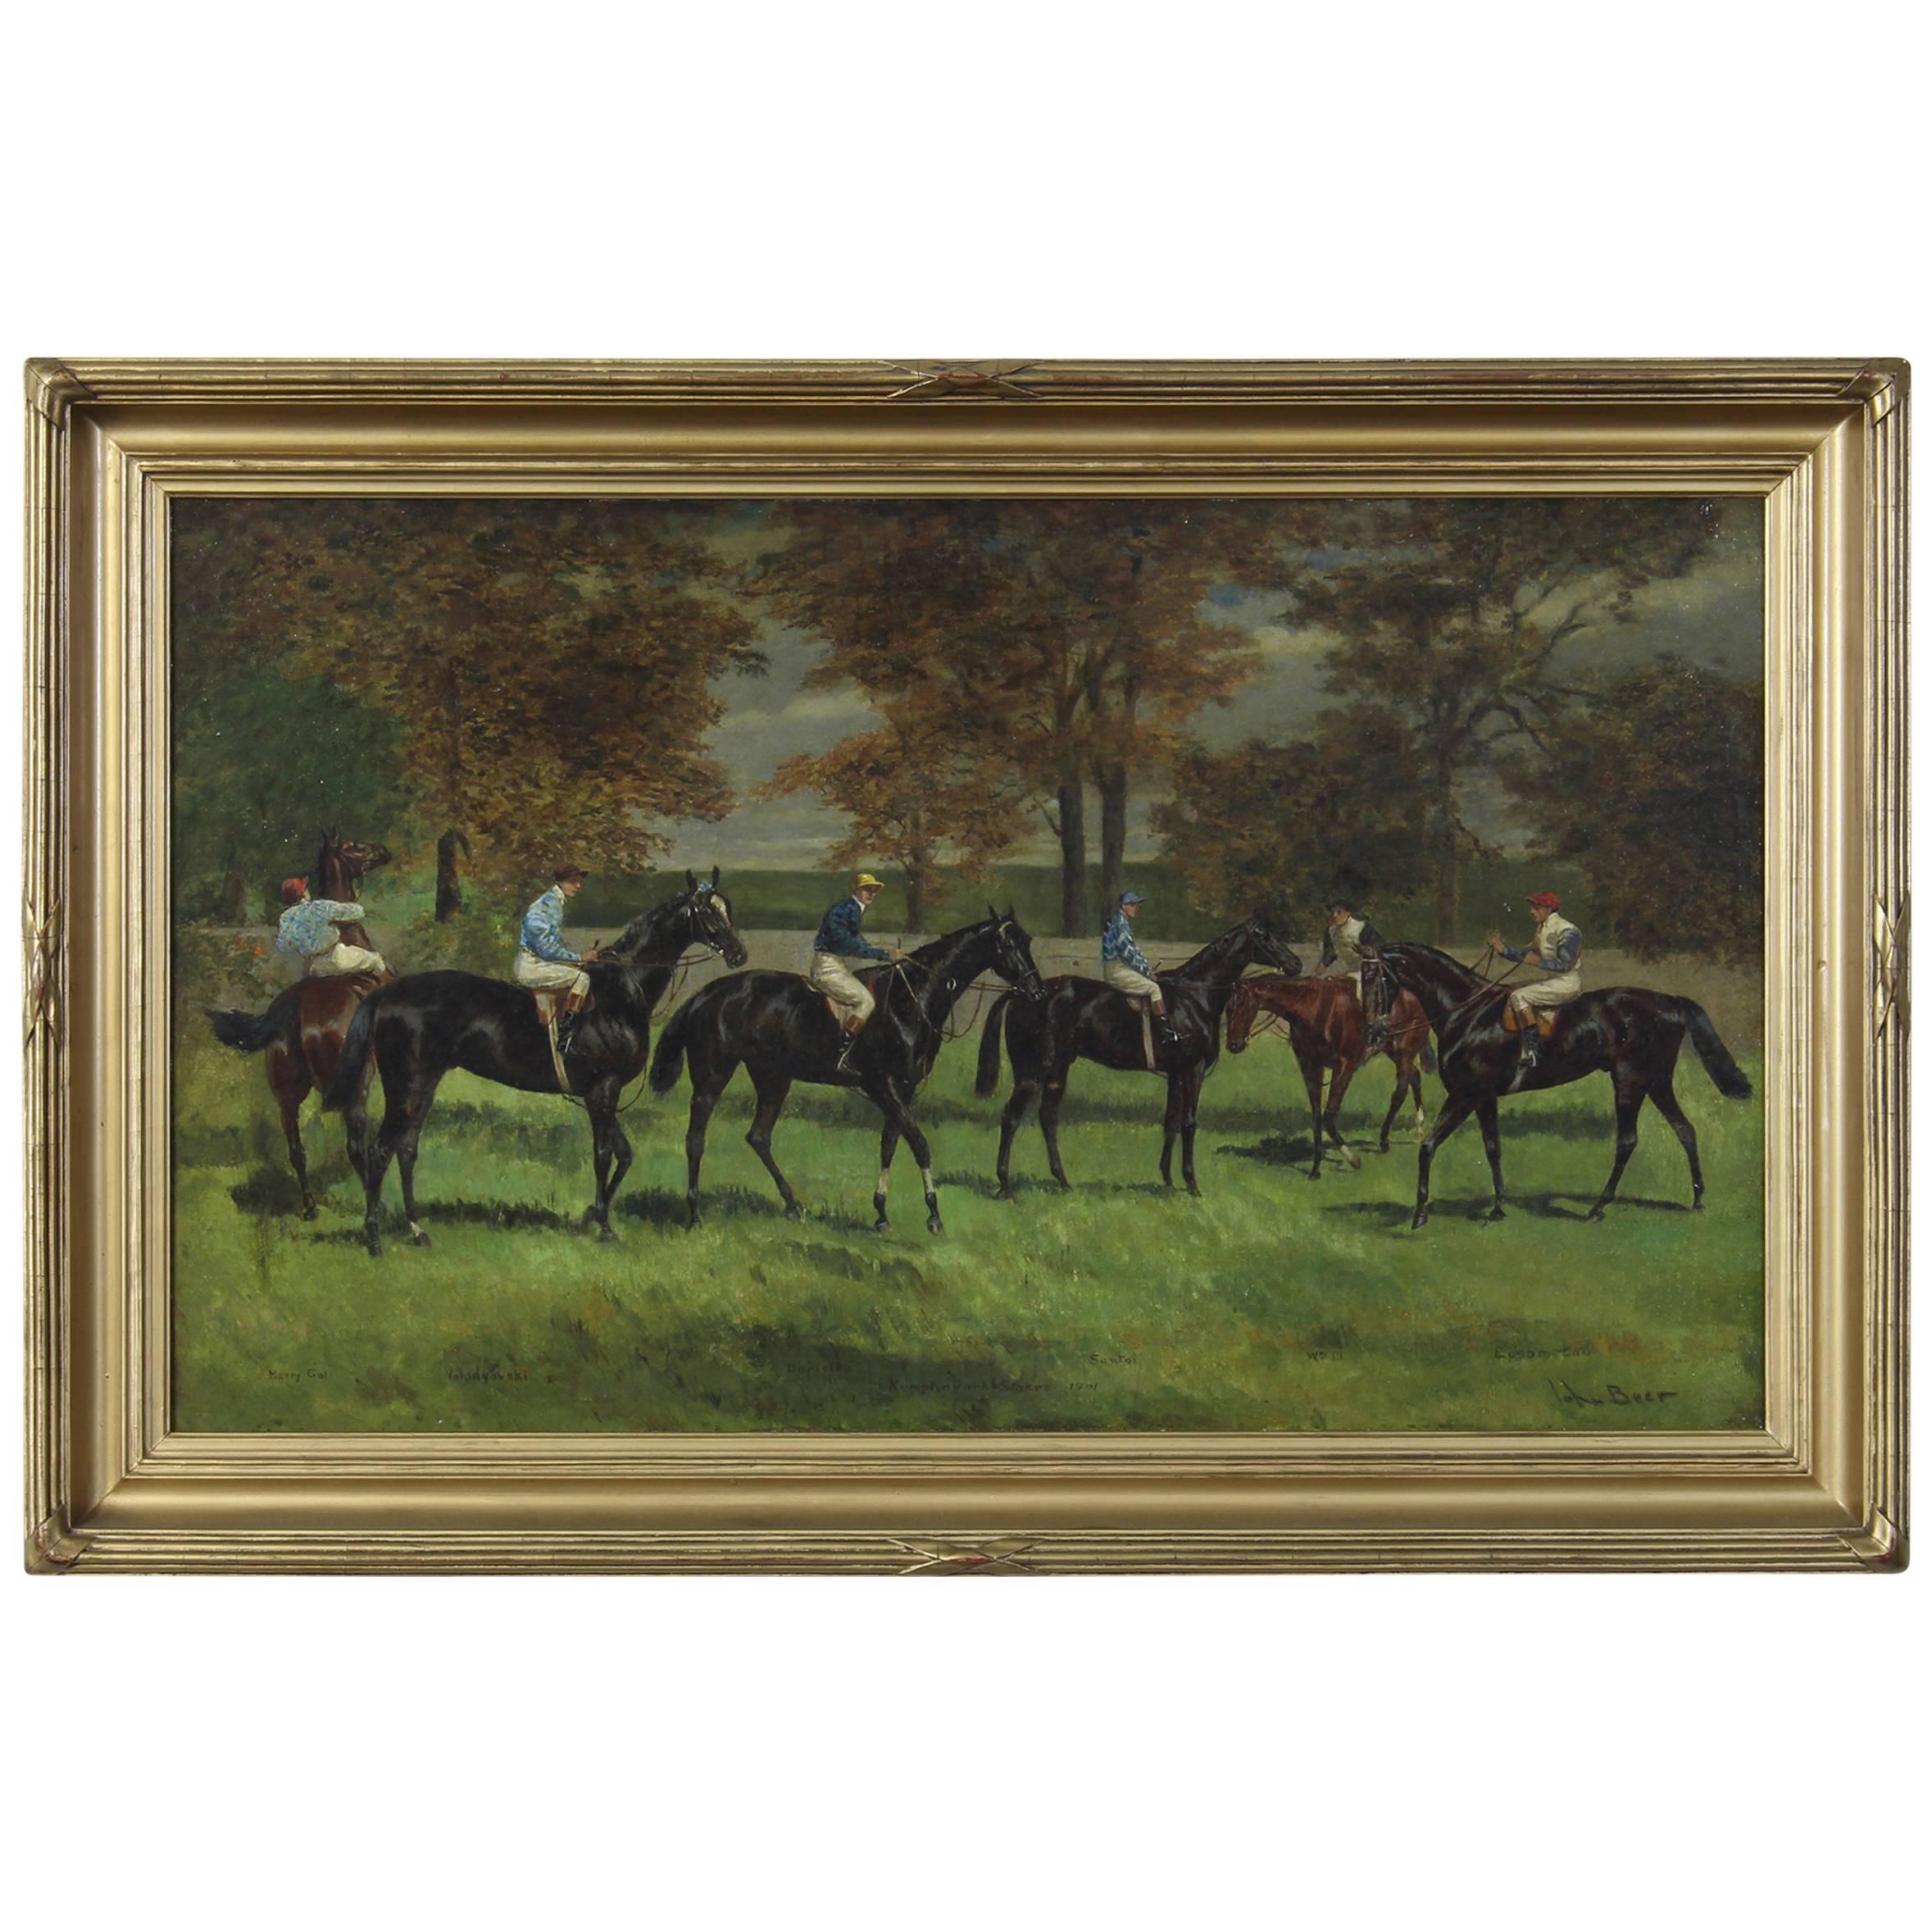 Early 20th Century Oil on Canvas Sporting Painting by John Beer